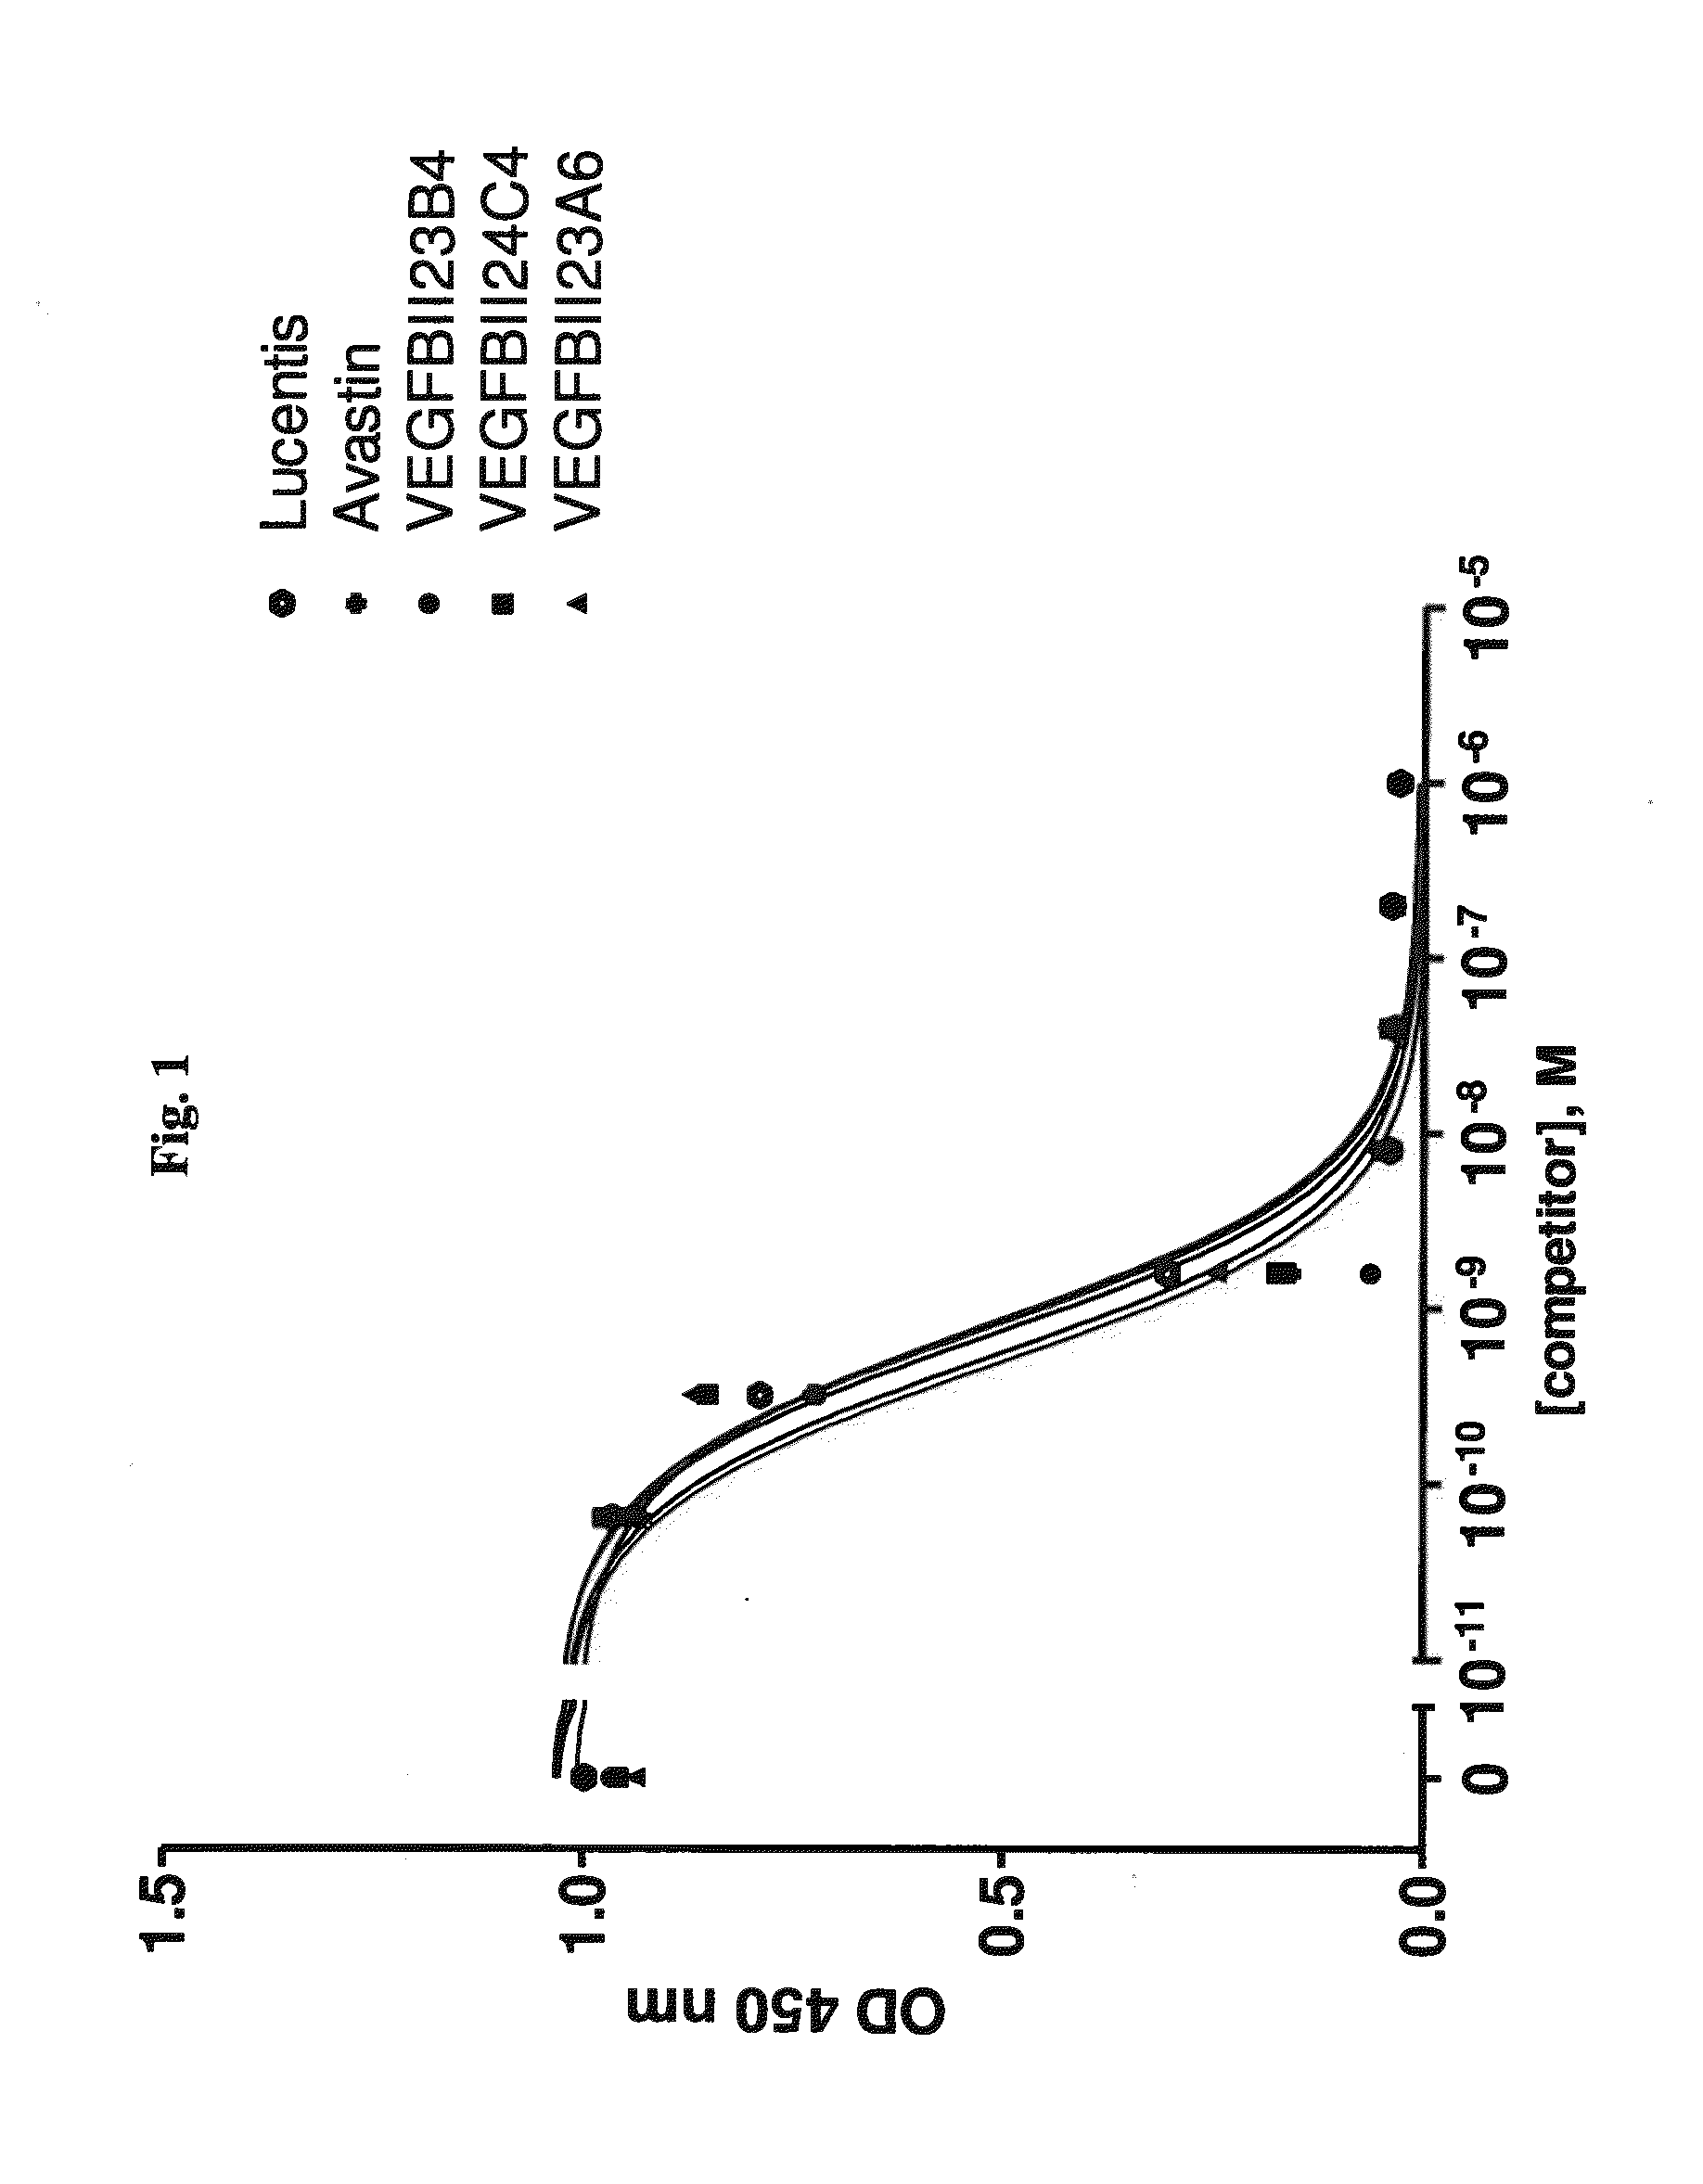 Bispecific binding molecules binding to VEGF and ang2